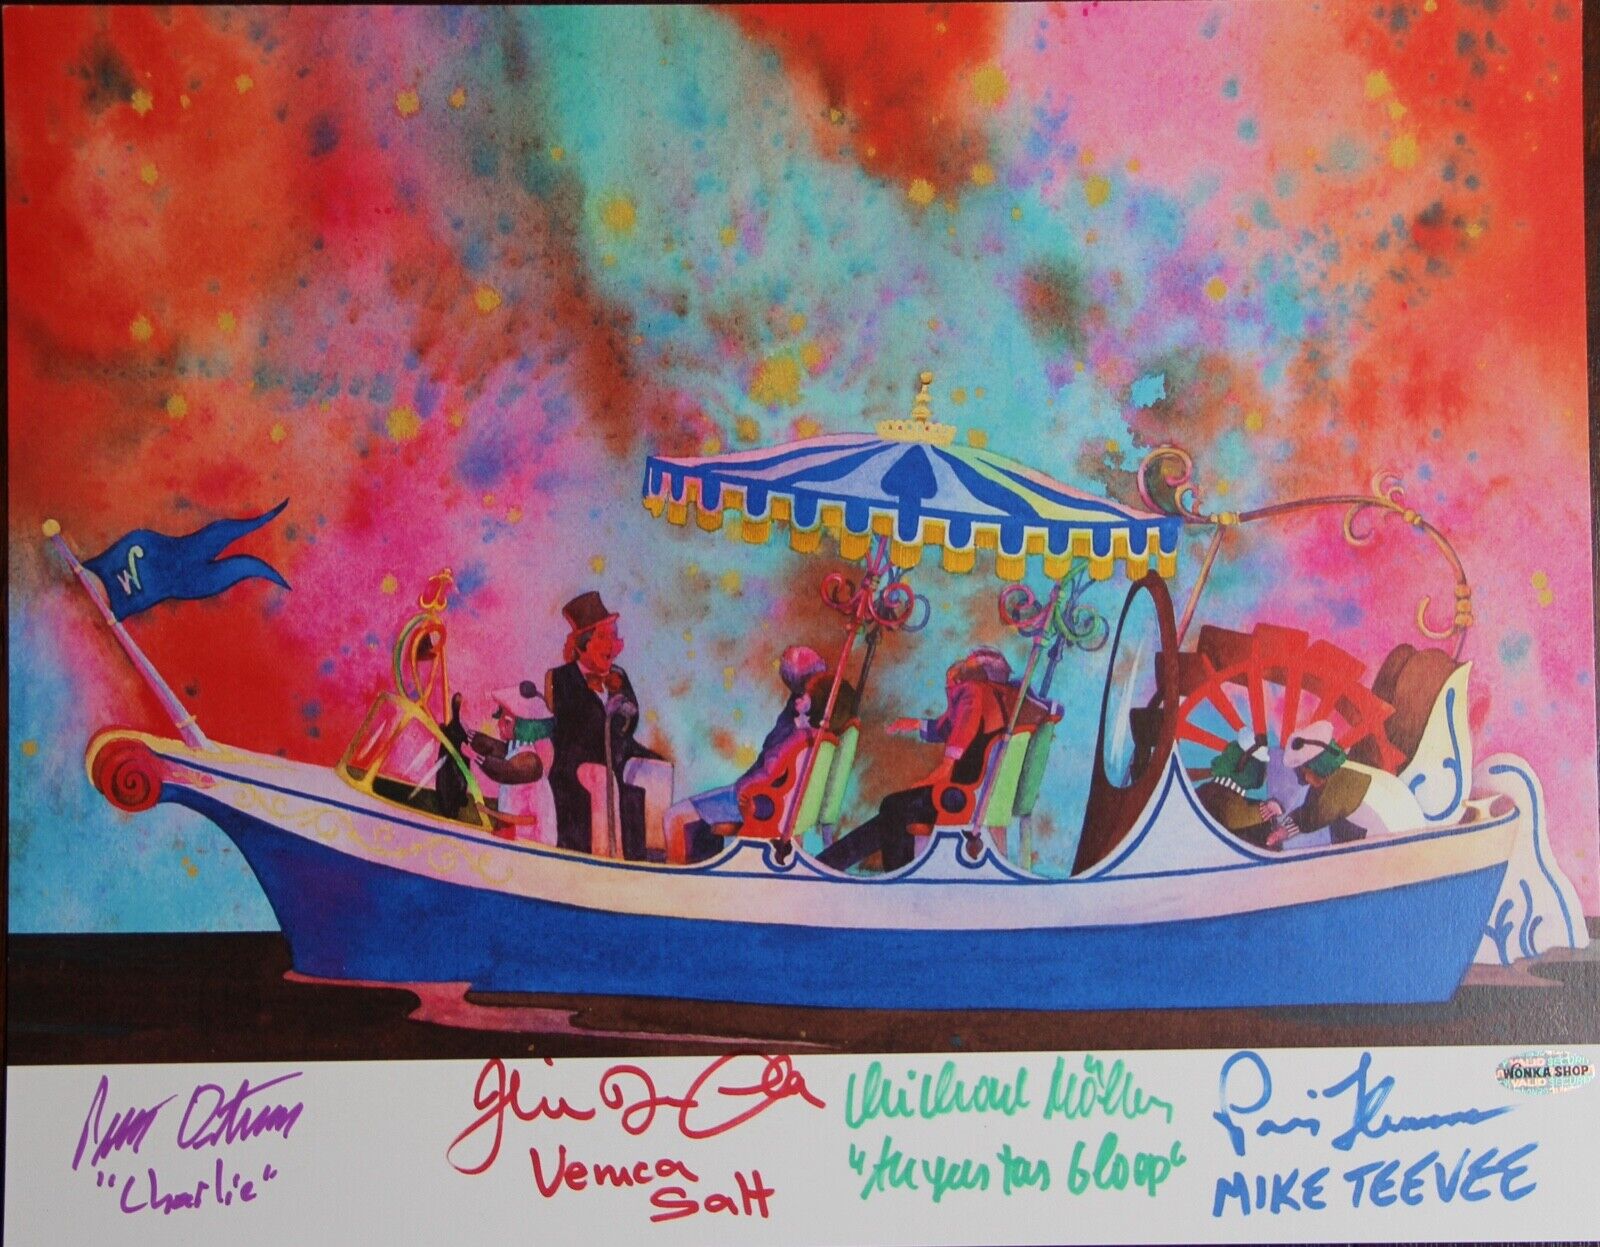 WILLY WONKA BOAT PRINT BY KATE SNOW - AUTOGRAPHED, SIGNED BY FOUR 11” X 14” 